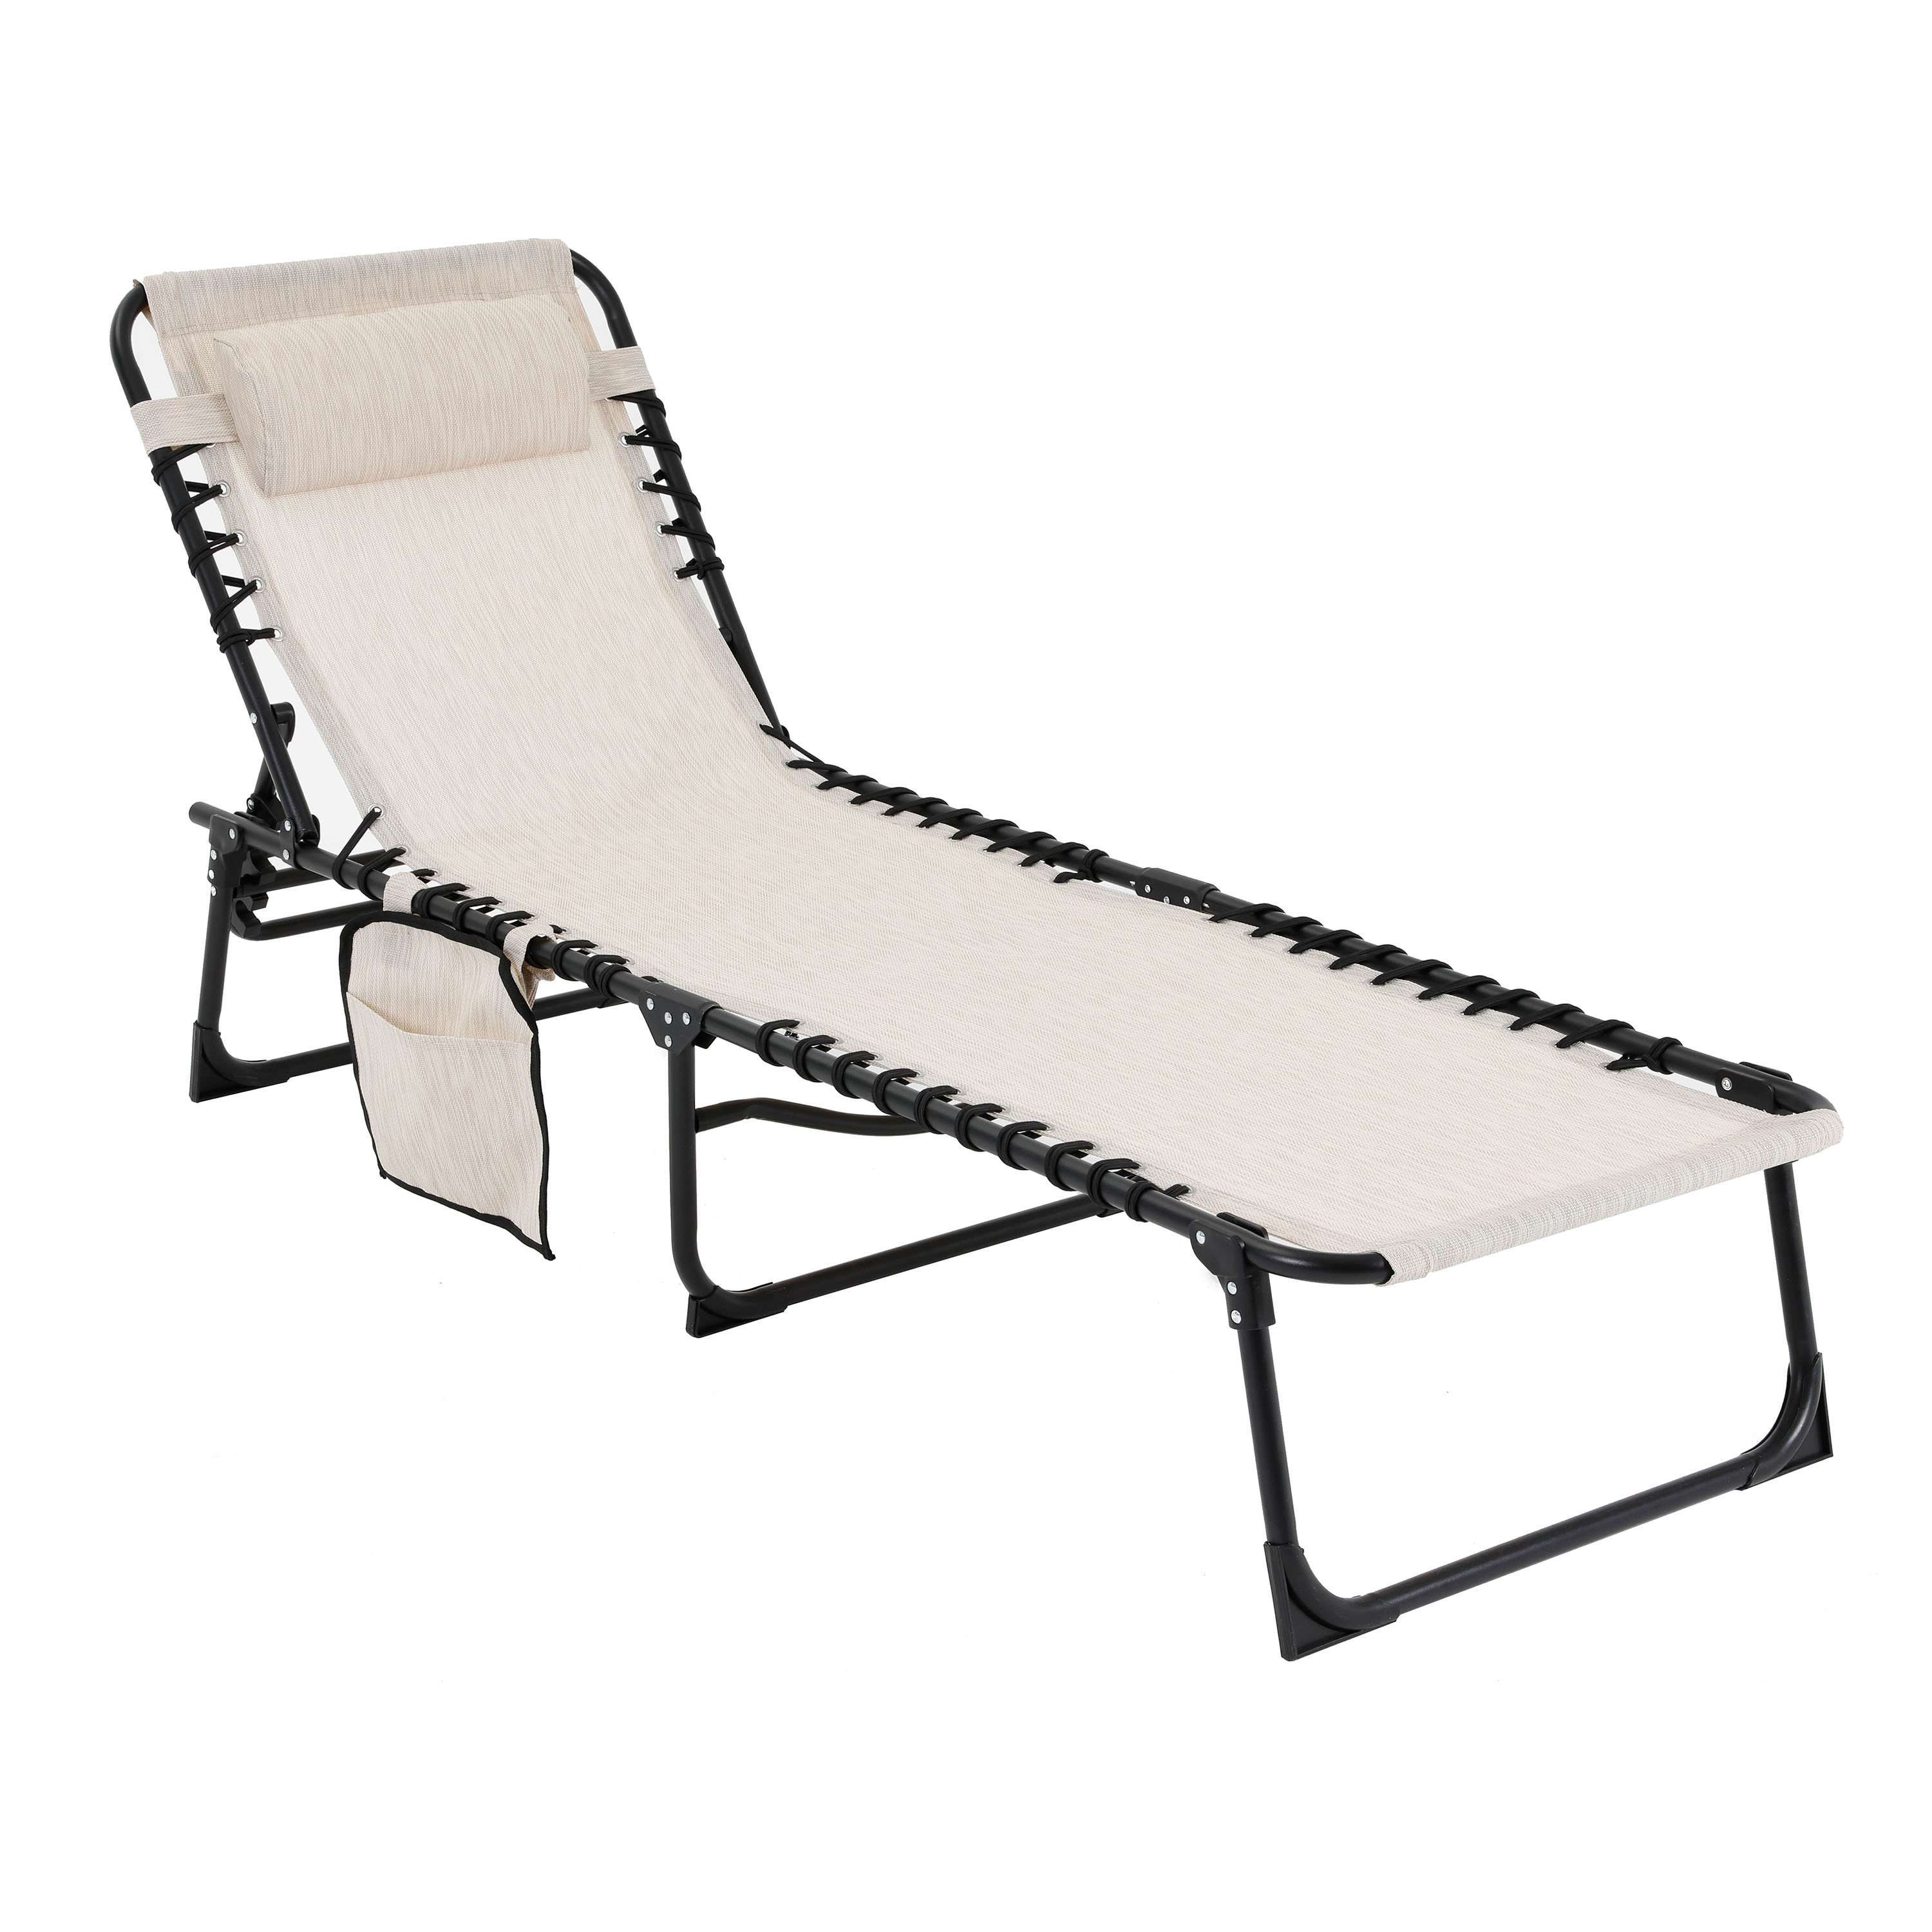 Veikous Outdoor Chaise Lounge Chair 4-Fold For Patio With Detachable Pocket  And Pillow, Cream White In The Patio Chairs Department At Lowes.Com